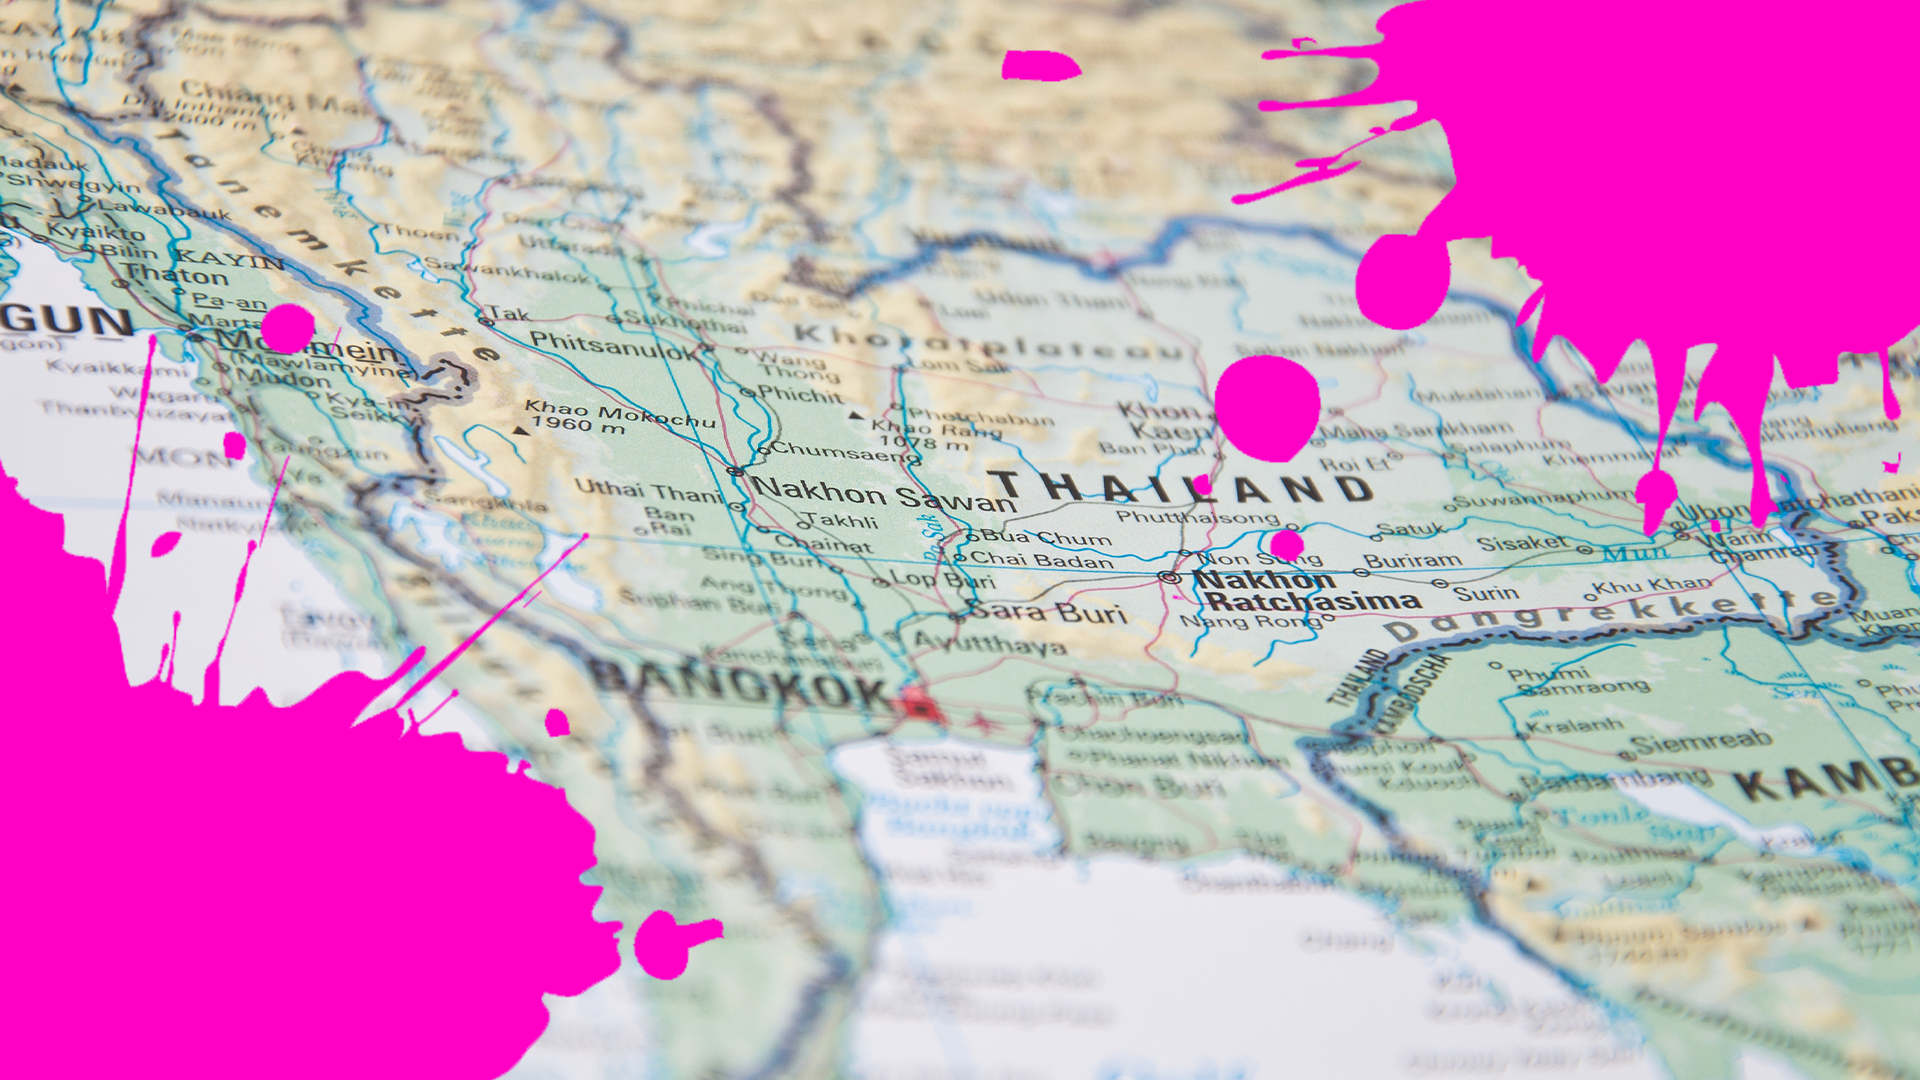 Map of South East Asia with pink splats